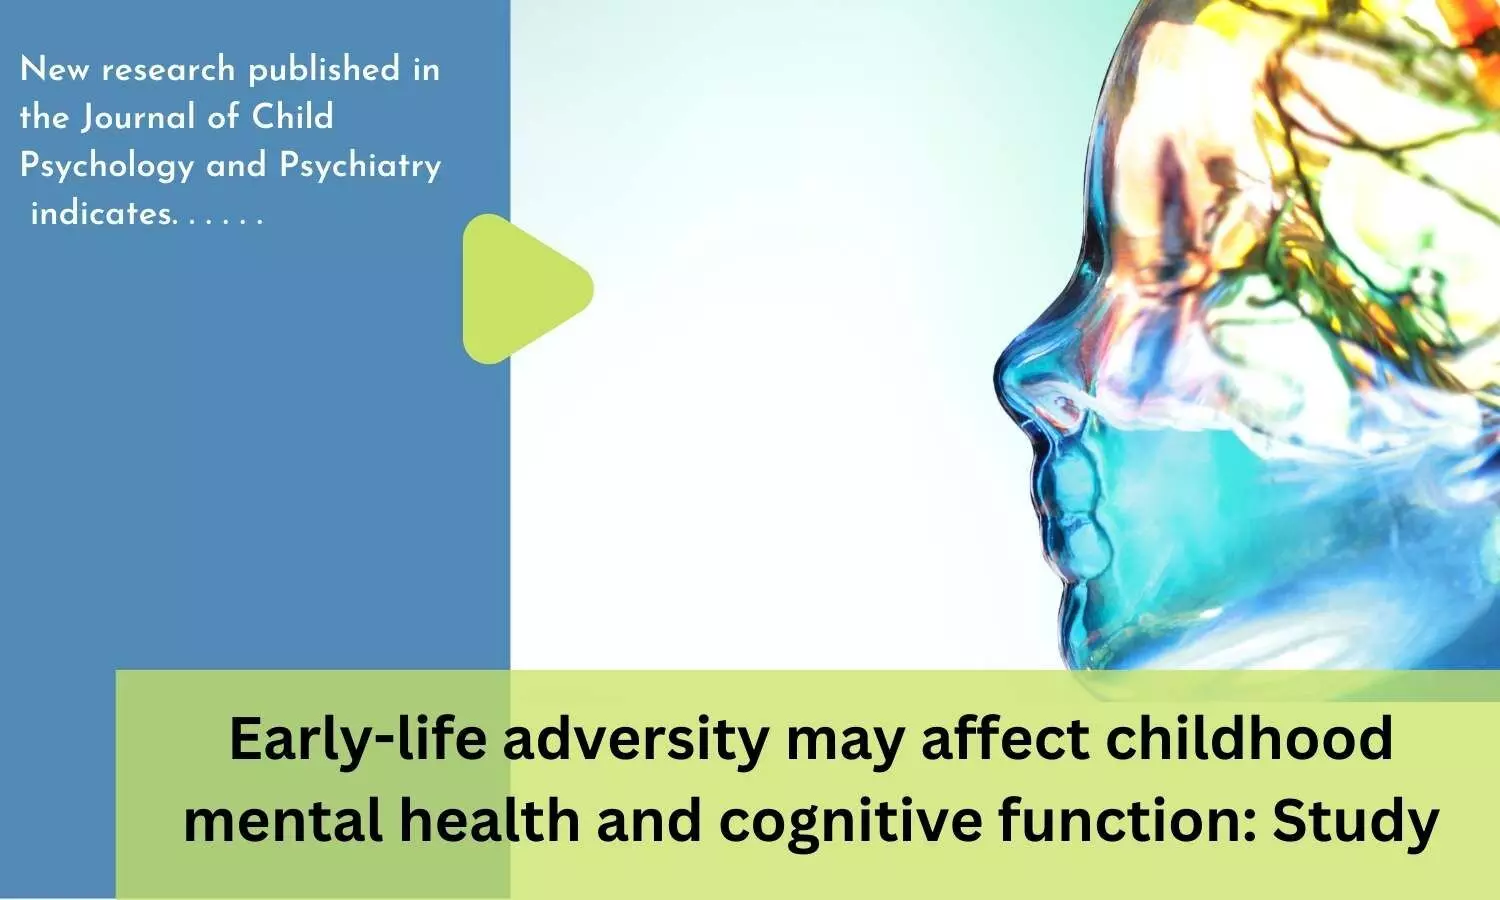 Early-life adversity may affect childhood mental health and cognitive function: Study